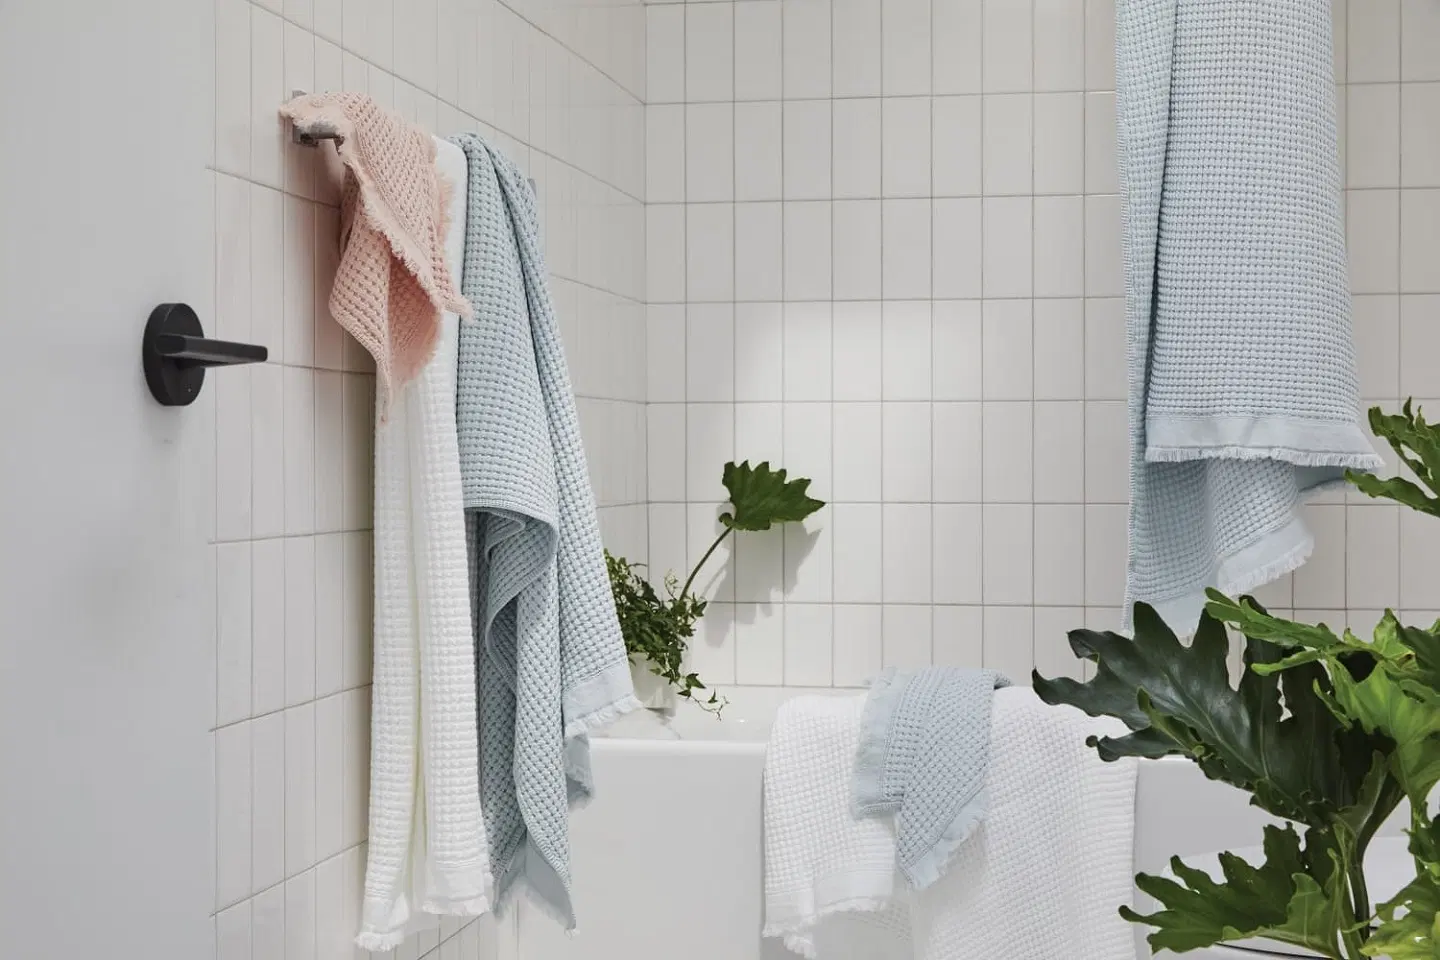 Practicality Meets Style: The Versatility of Towels